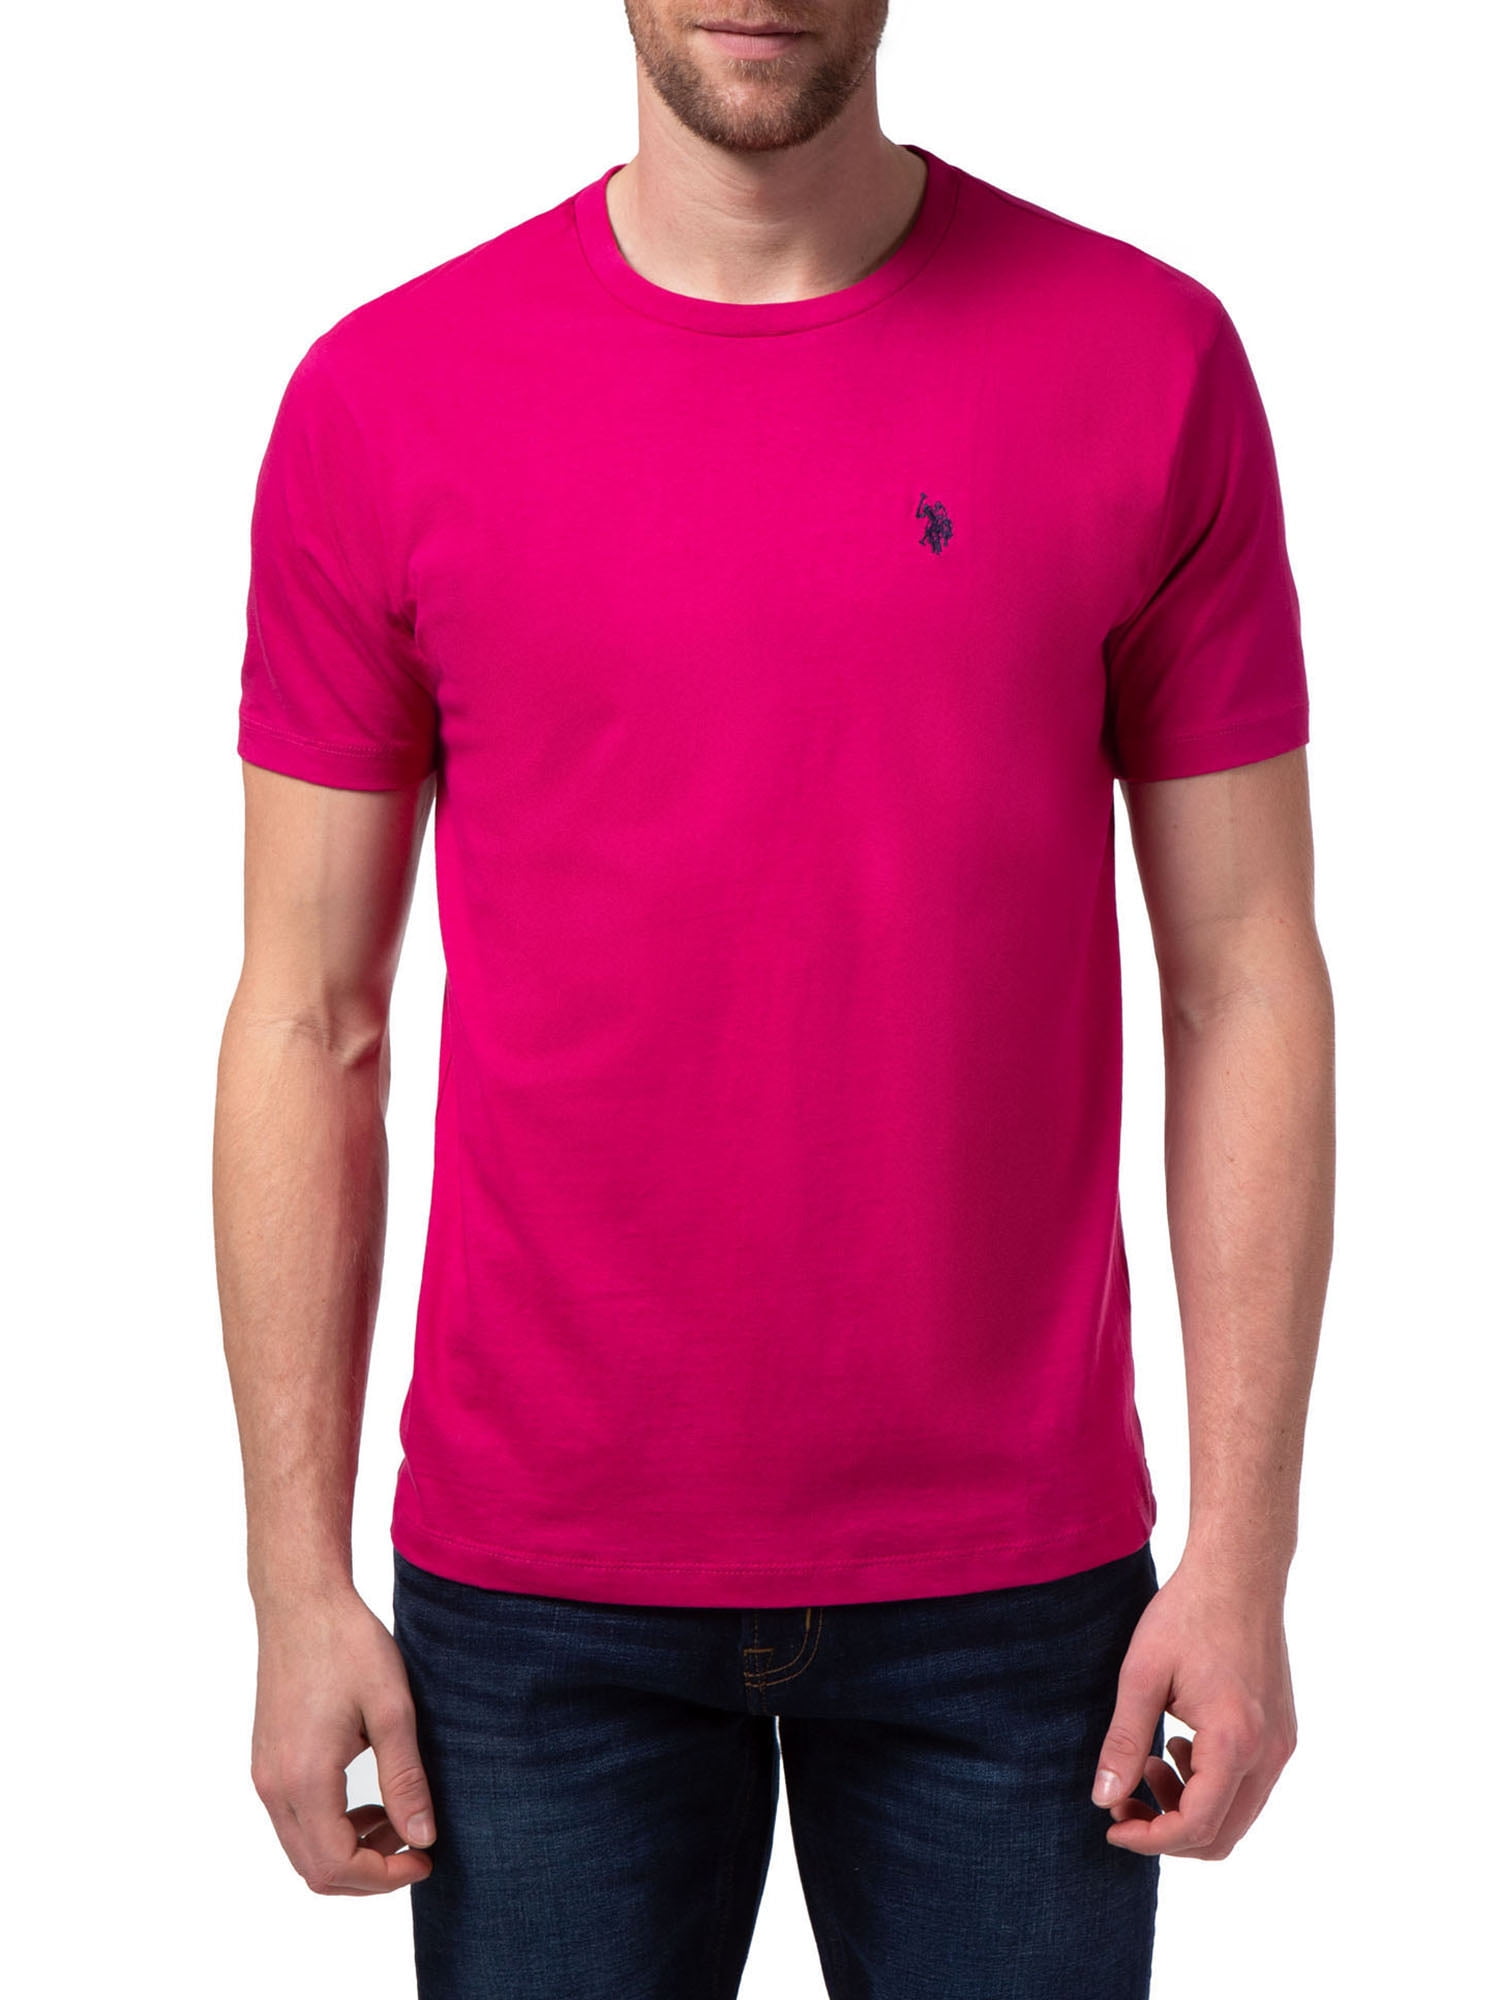 Very berry  Short men fashion, Pink shirt outfit, Mens summer outfits